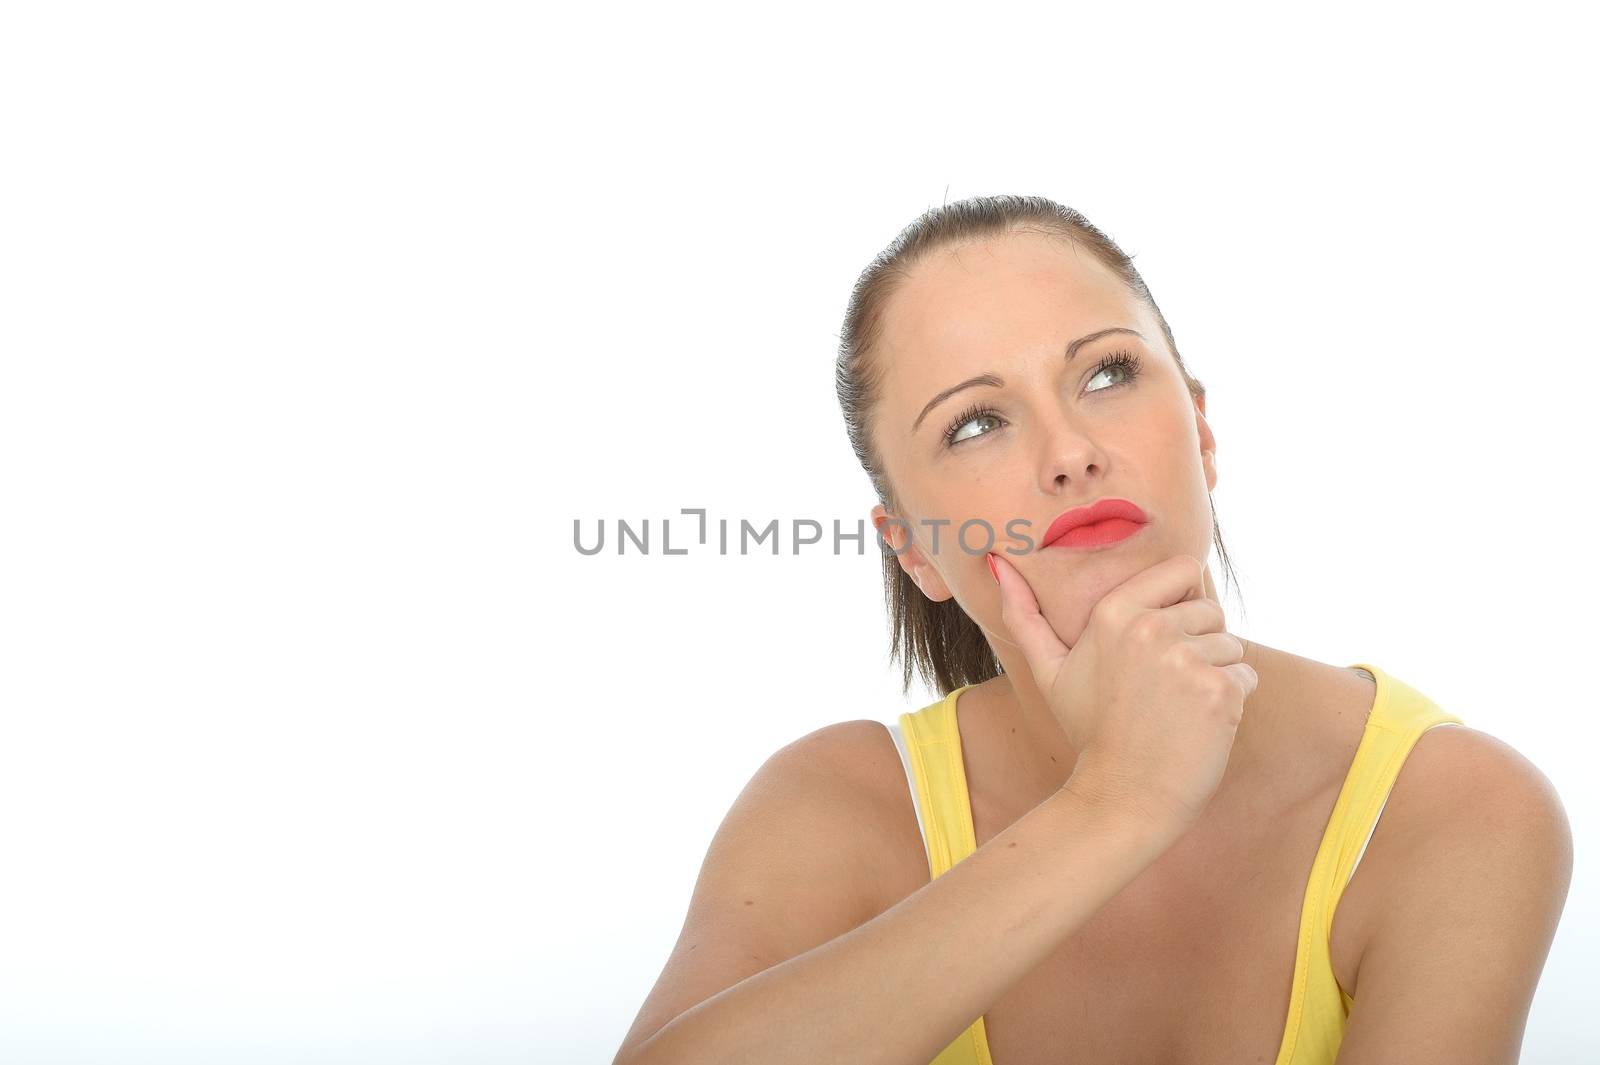 Portrait of an Attractive Young Woman Thinking or Pondering a Problem